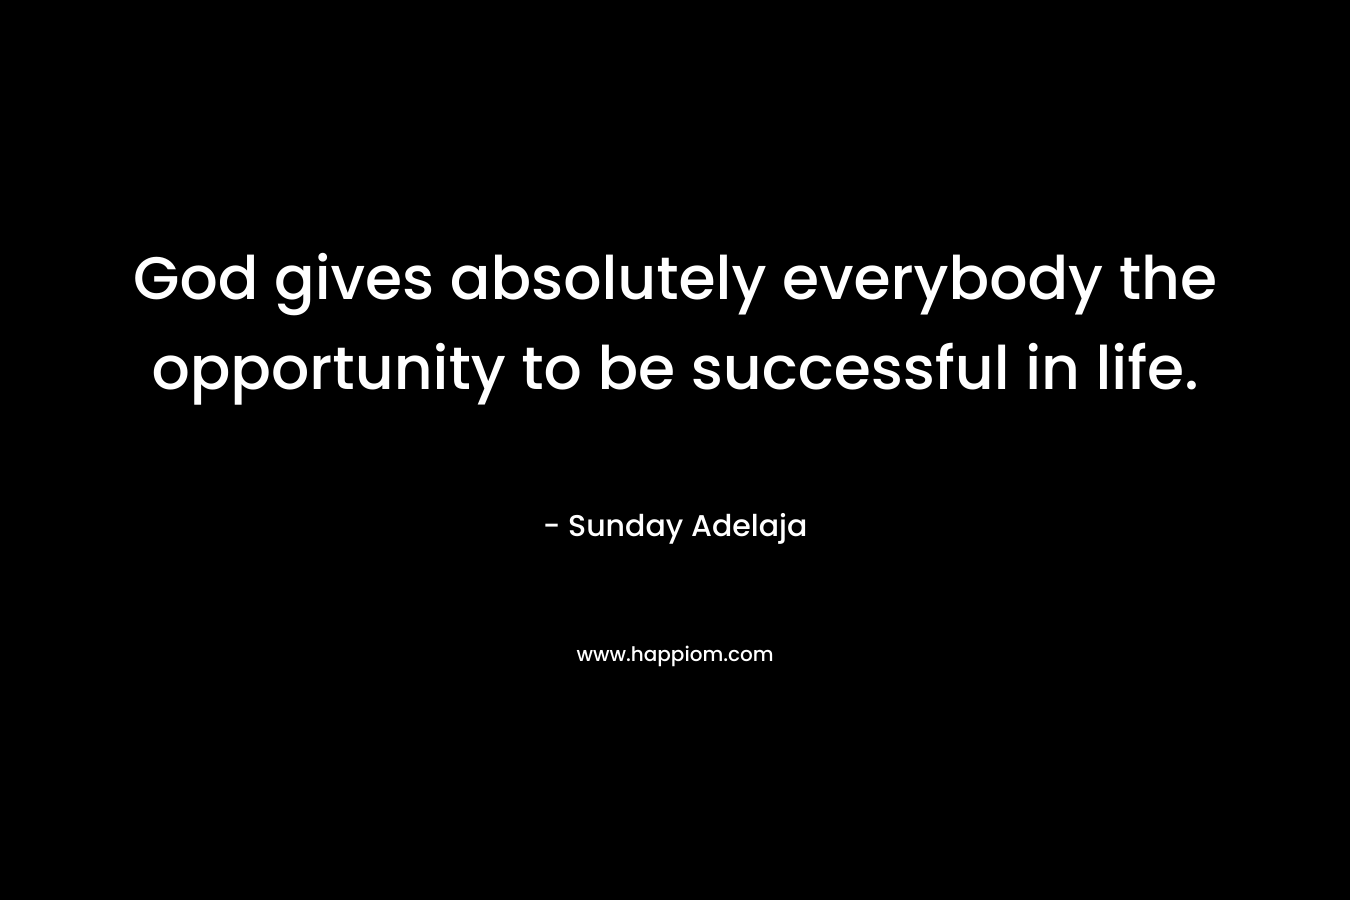 God gives absolutely everybody the opportunity to be successful in life.